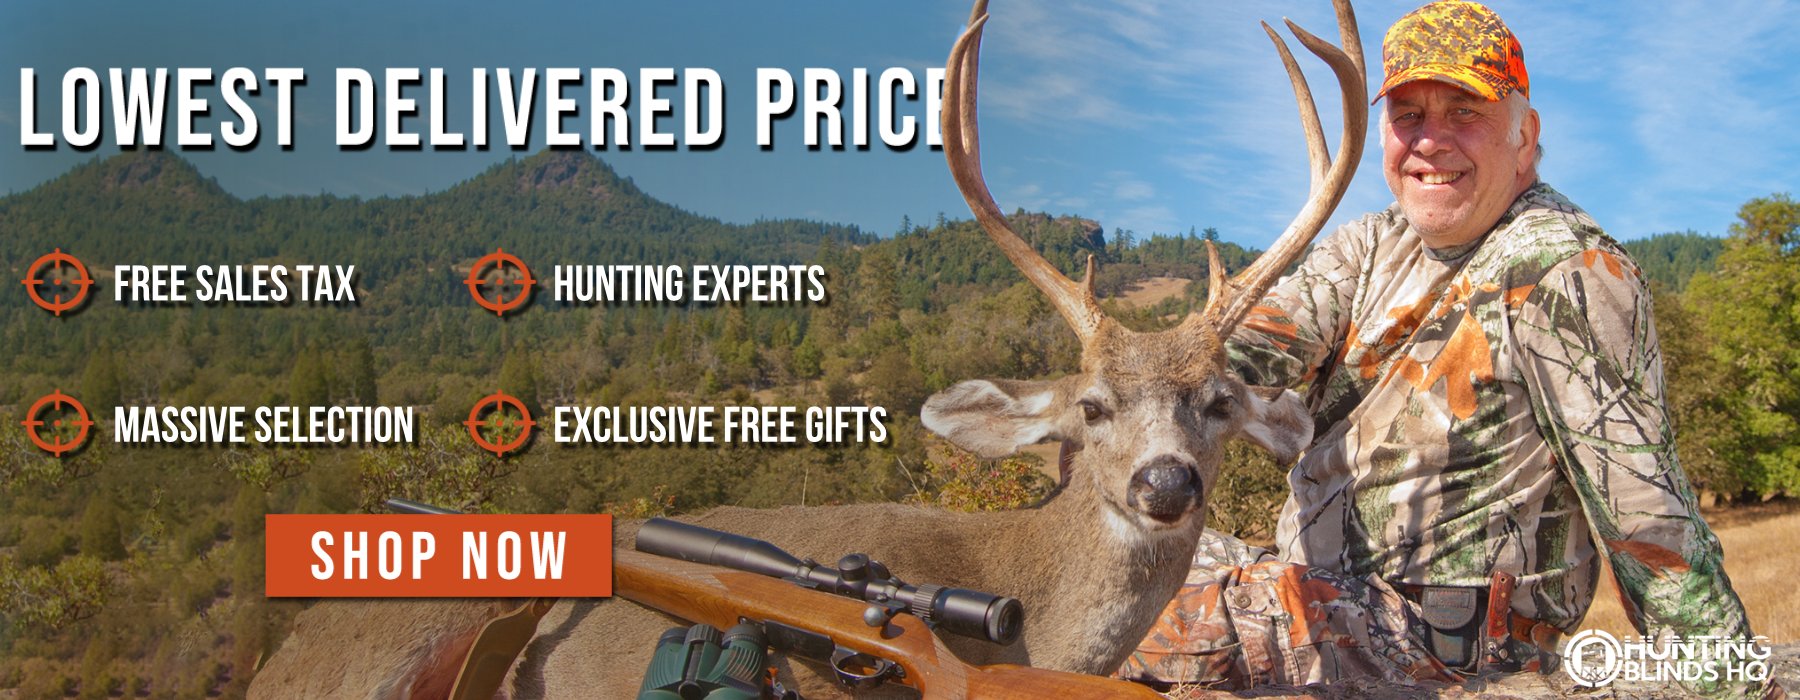 #1 Online Store for Hunting Blinds - HuntingBlindsHQ